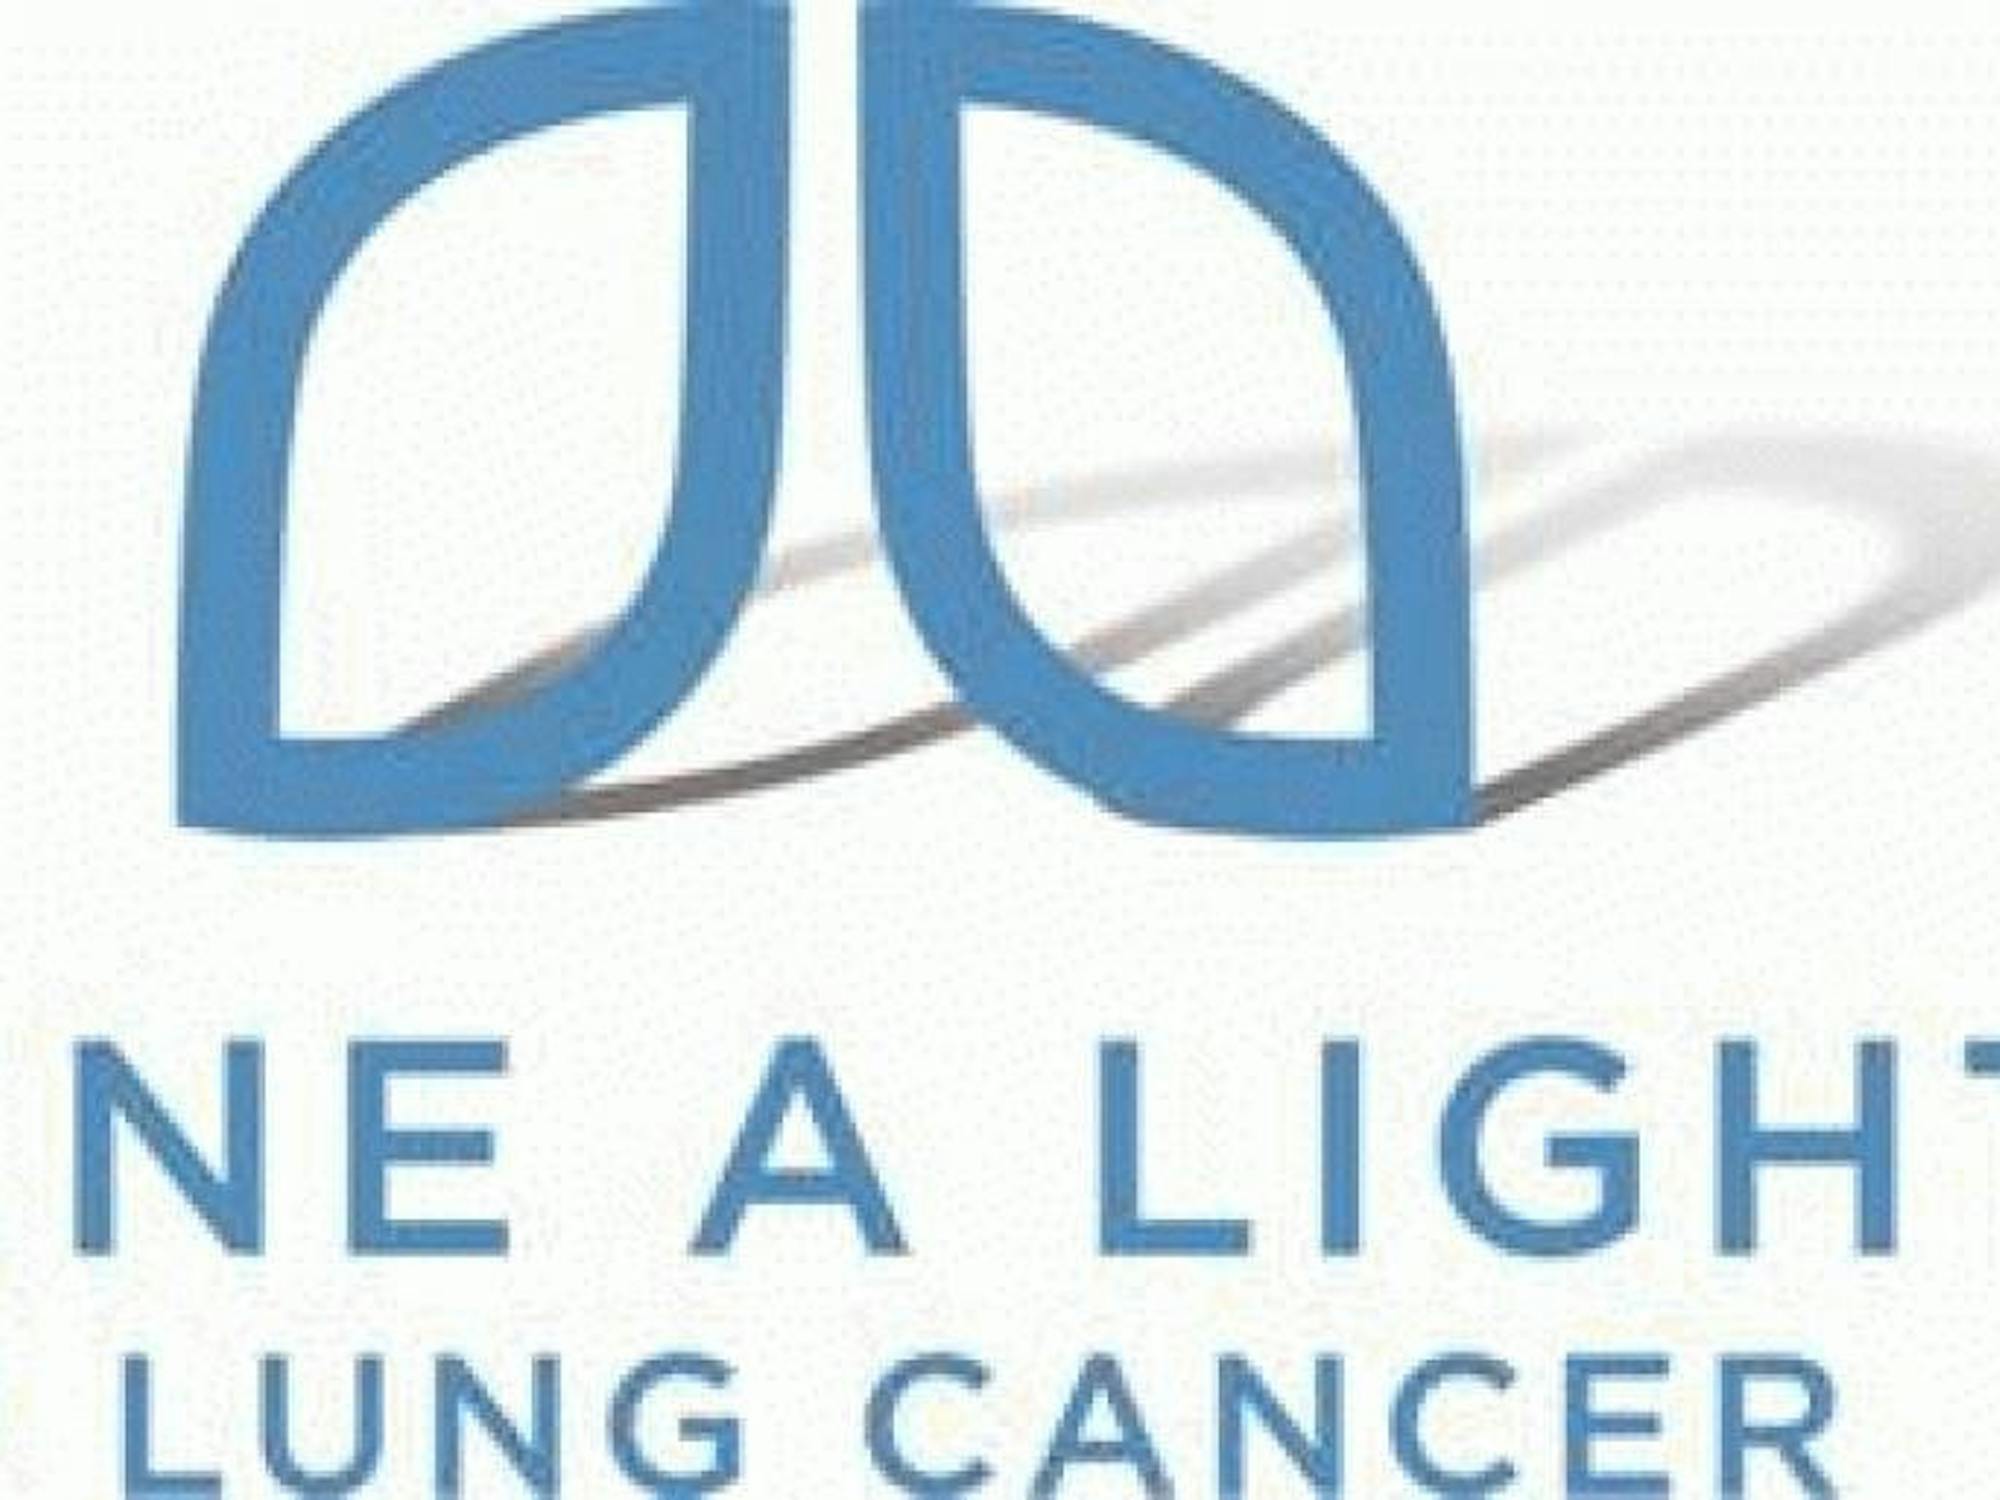 The Shine a Light on Lung Cancer event will be held from 5:30-7:30 p.m., Thursday at St. Joseph Mercy Hospital.